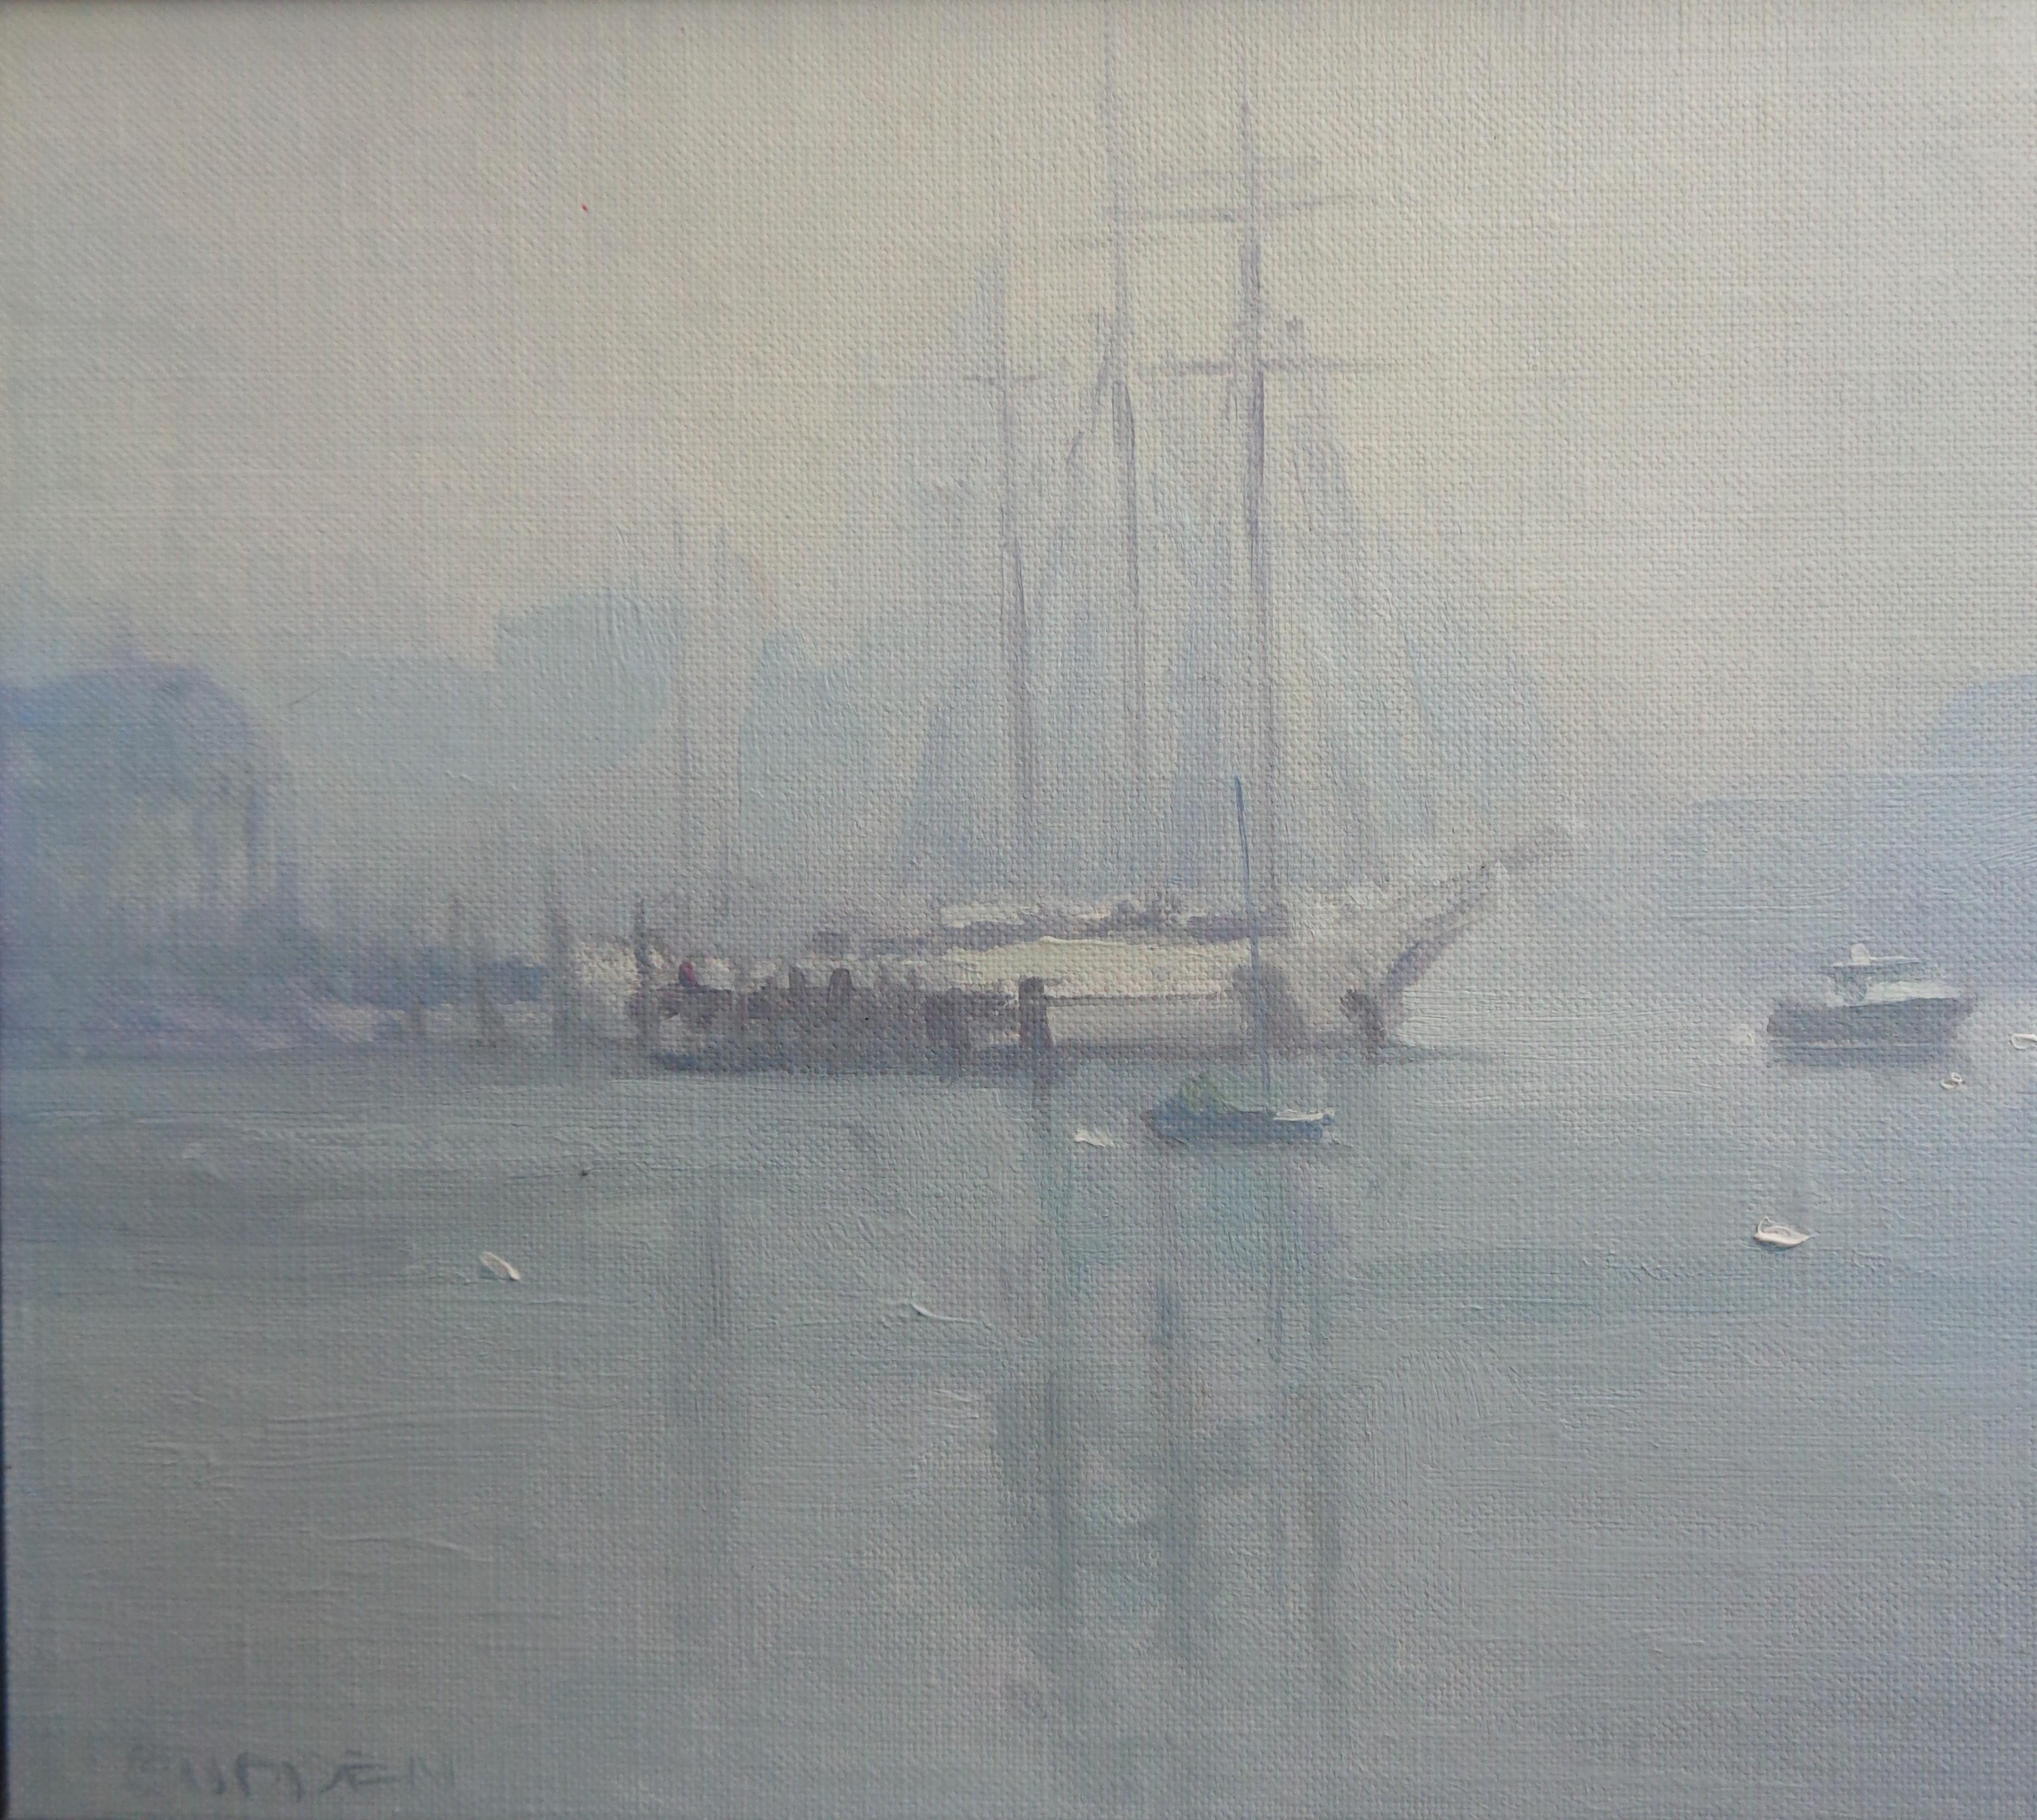 Boat Beach Ocean Impressionistic Seascape Painting Michael Budden Mystic Seaport For Sale 2